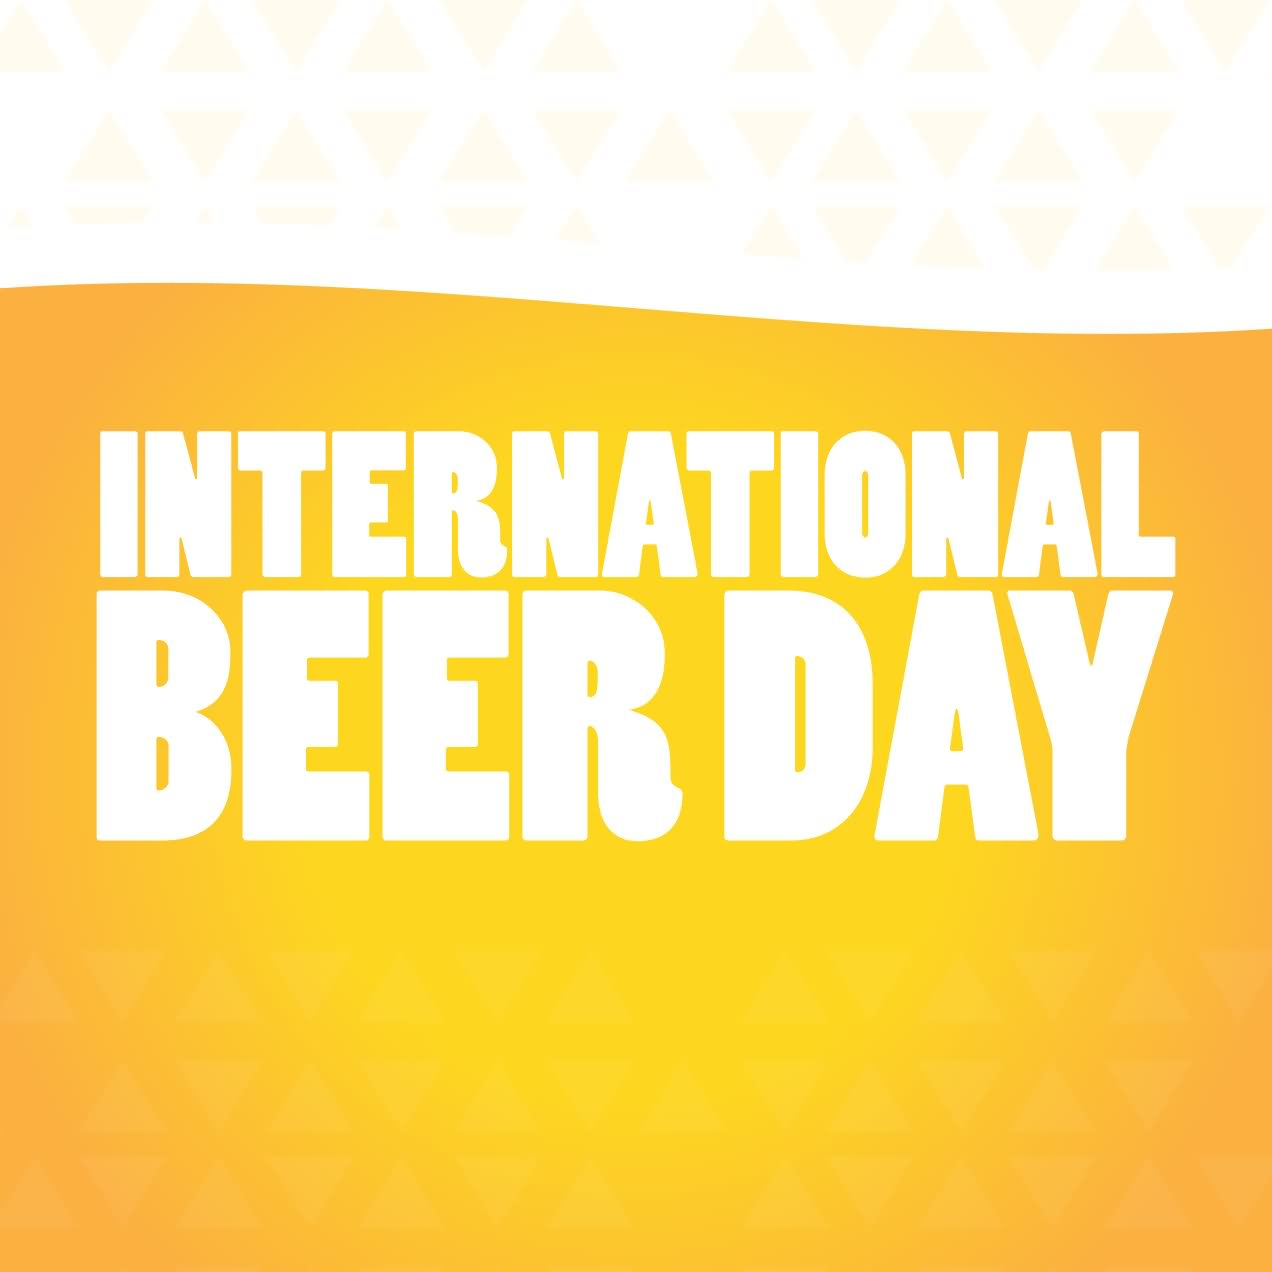 21 Beautiful Wish Pictures Of The International Beer Day